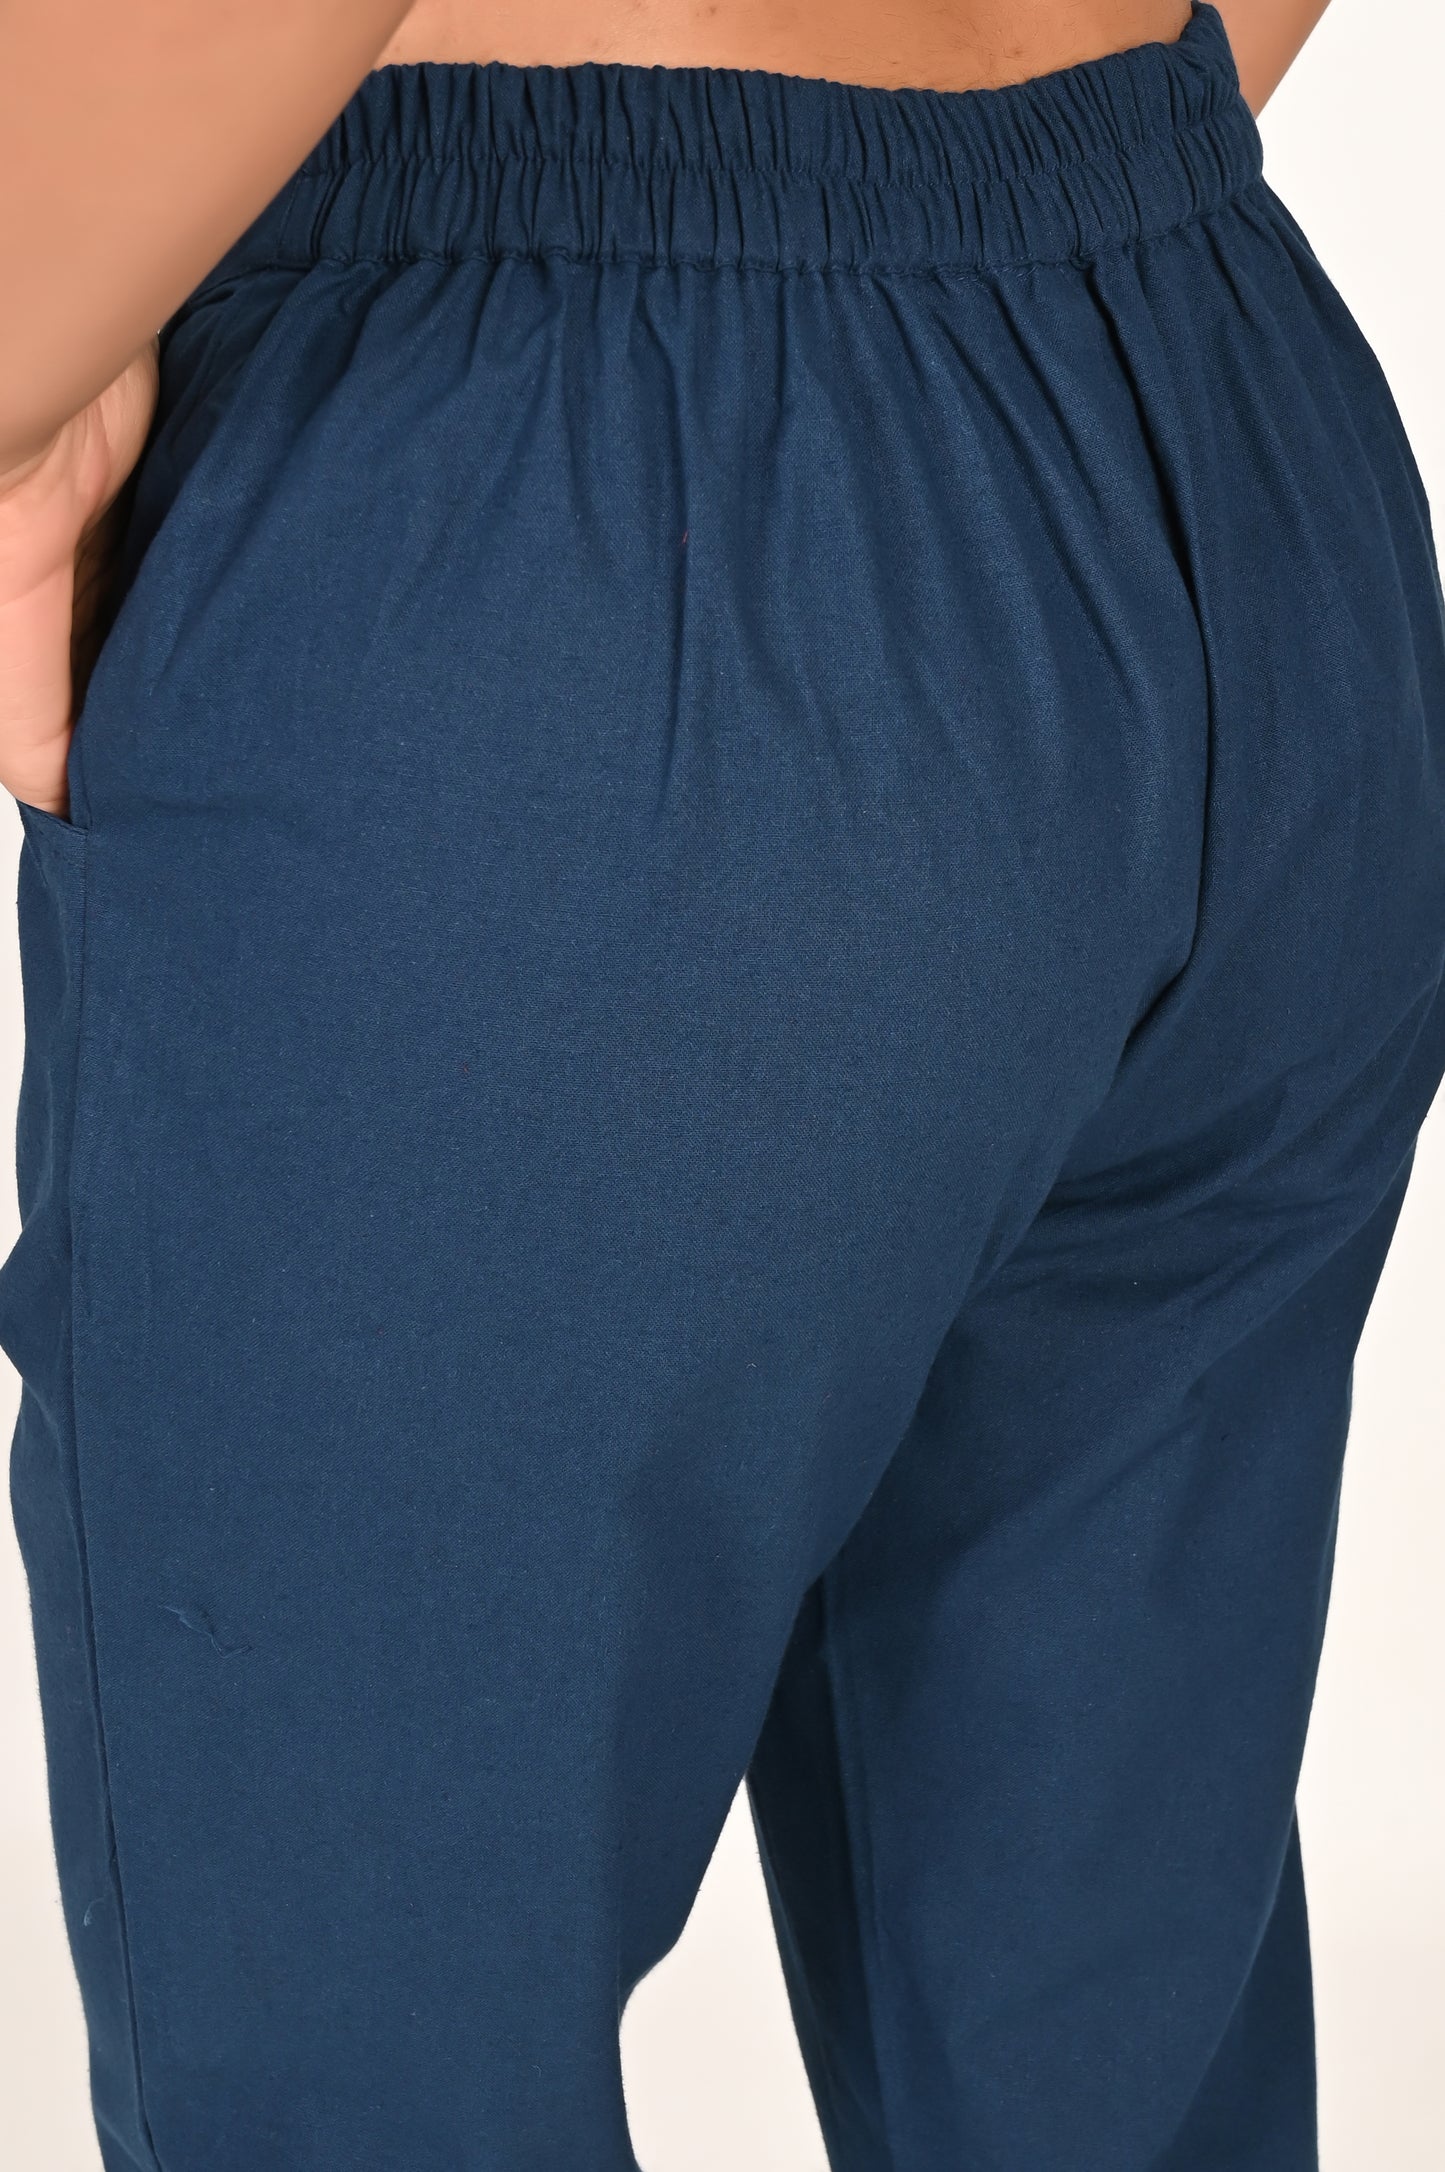 Peacock Blue Everyday Cotton Pant